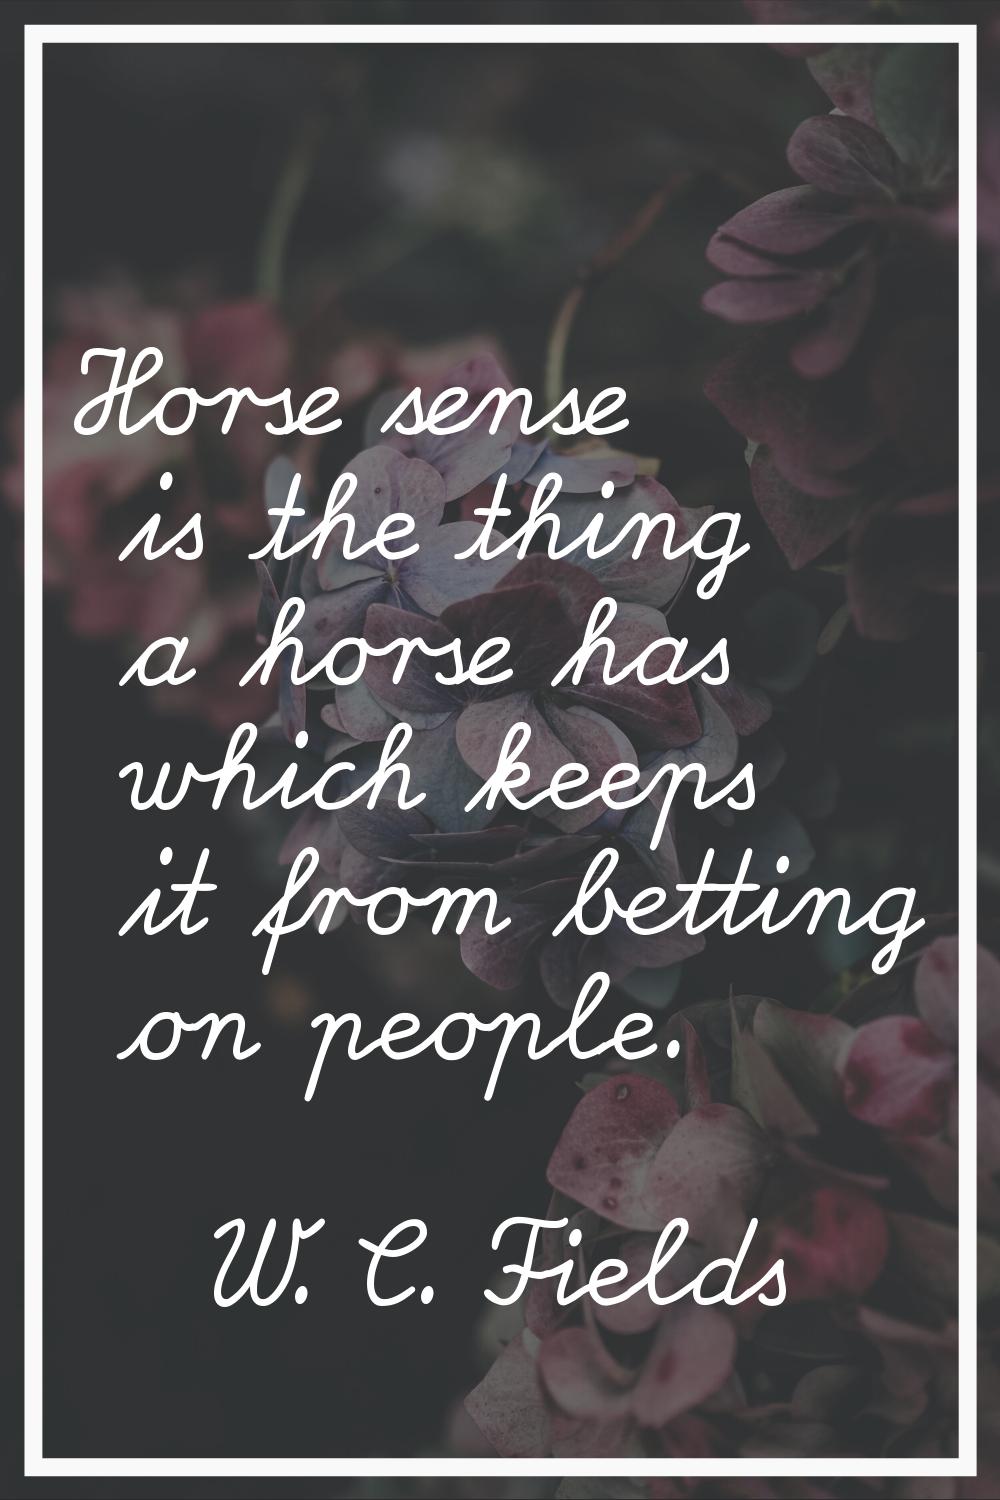 Horse sense is the thing a horse has which keeps it from betting on people.